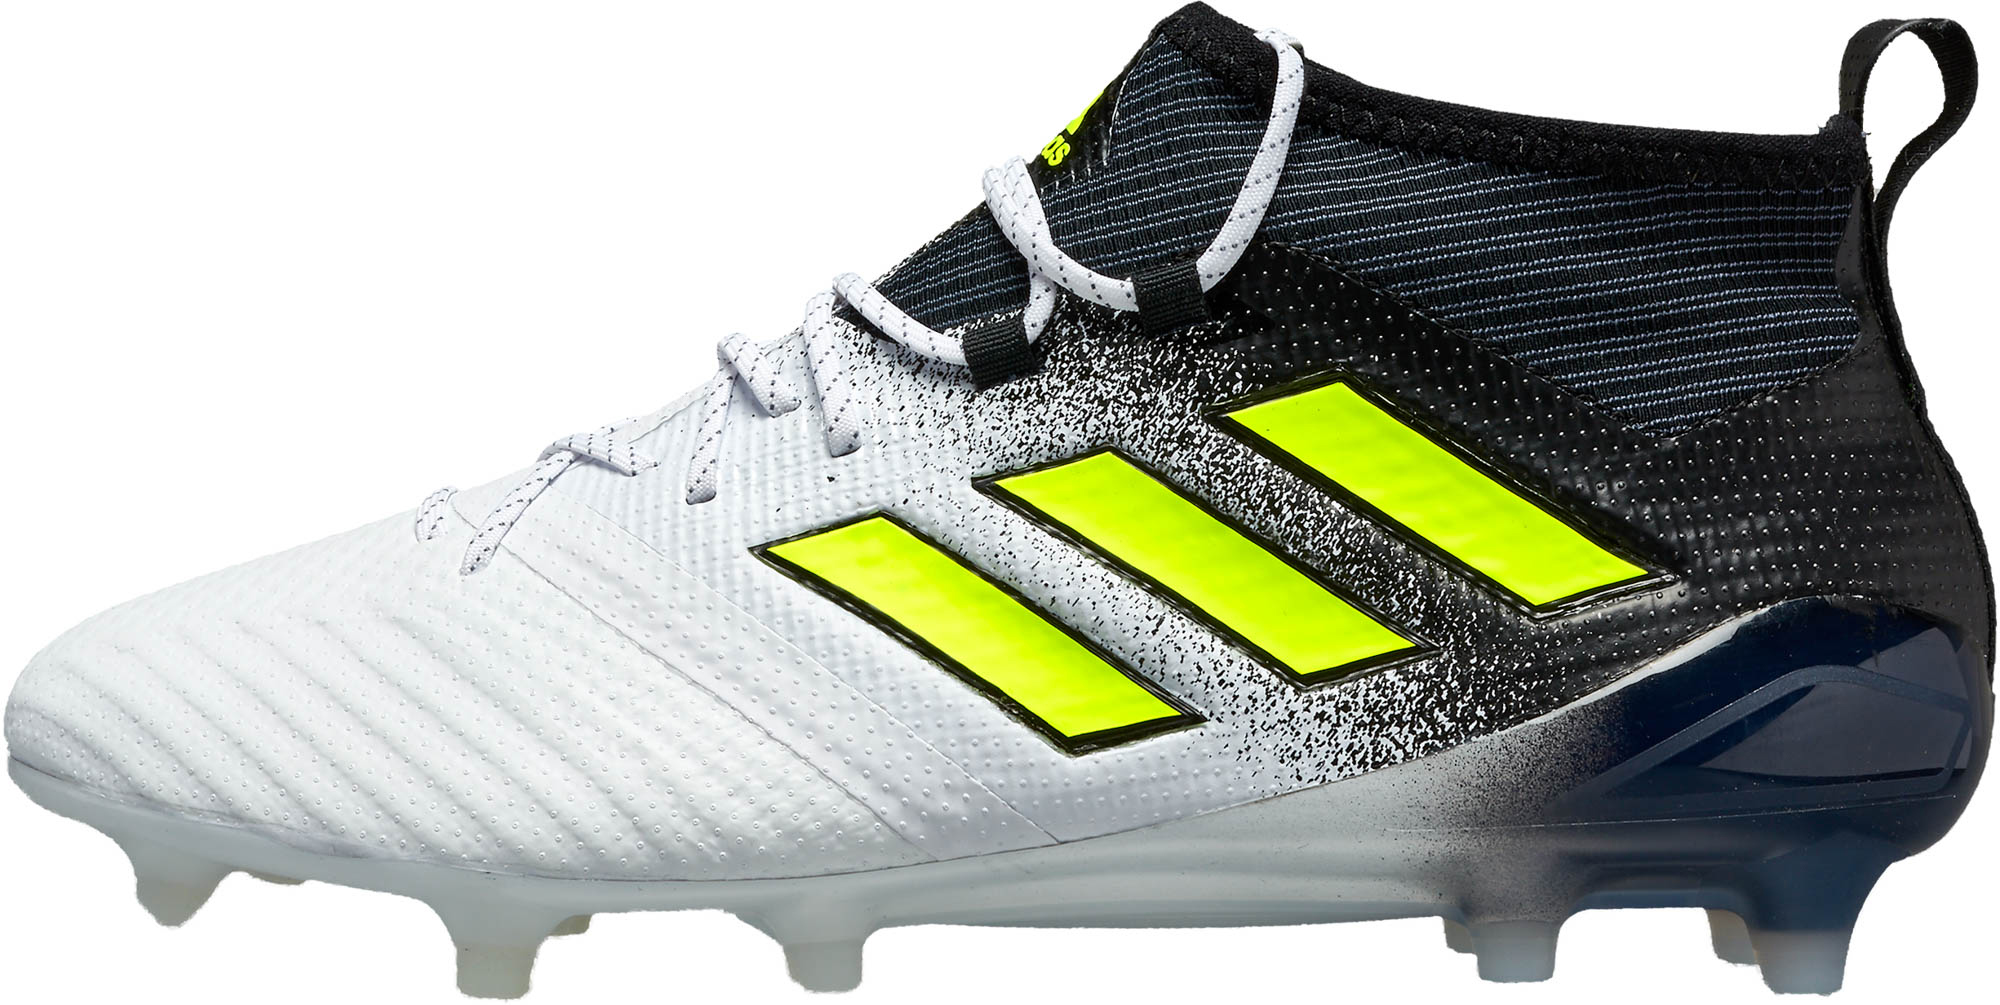 adidas ACE 17.1 FG - White adidas ACE Soccer Cleats